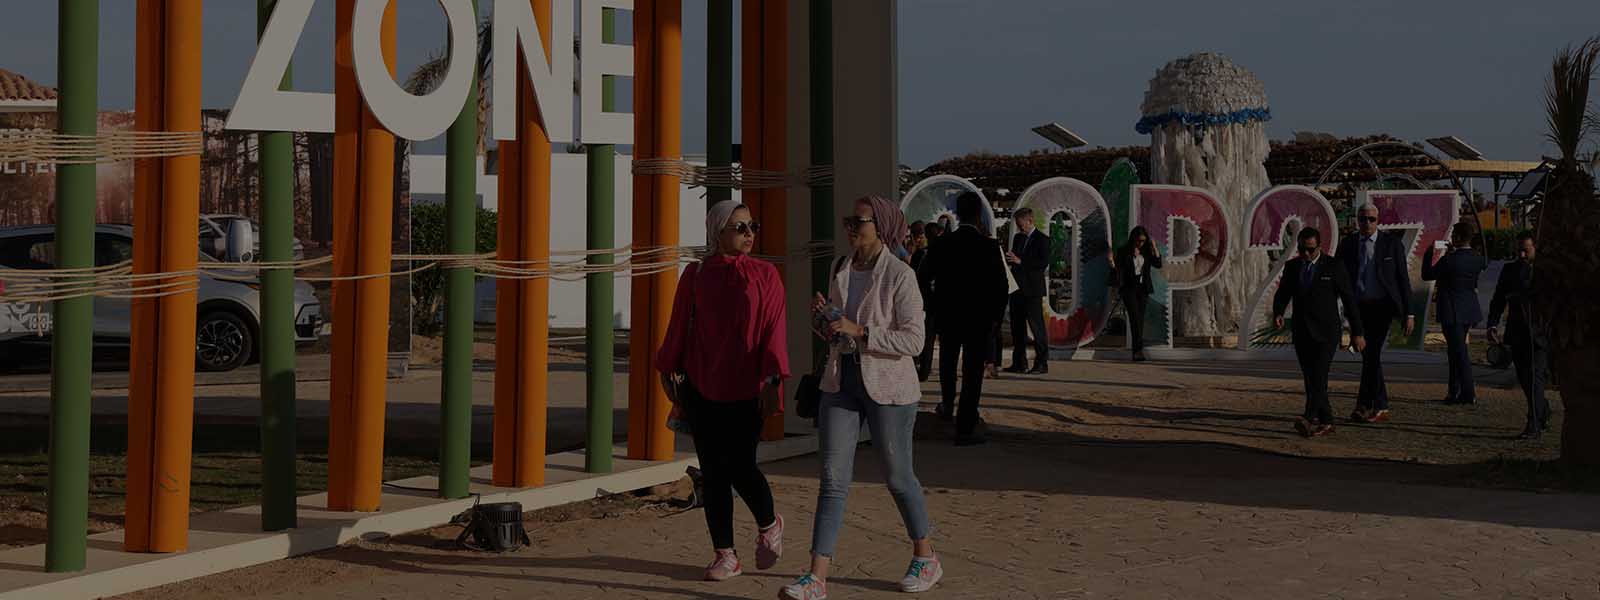 Two women walking outdoors past a large sign that says ‘Green zone’ at the Cop 27 climate change summit in Sharm El Sheikh, Egypt.